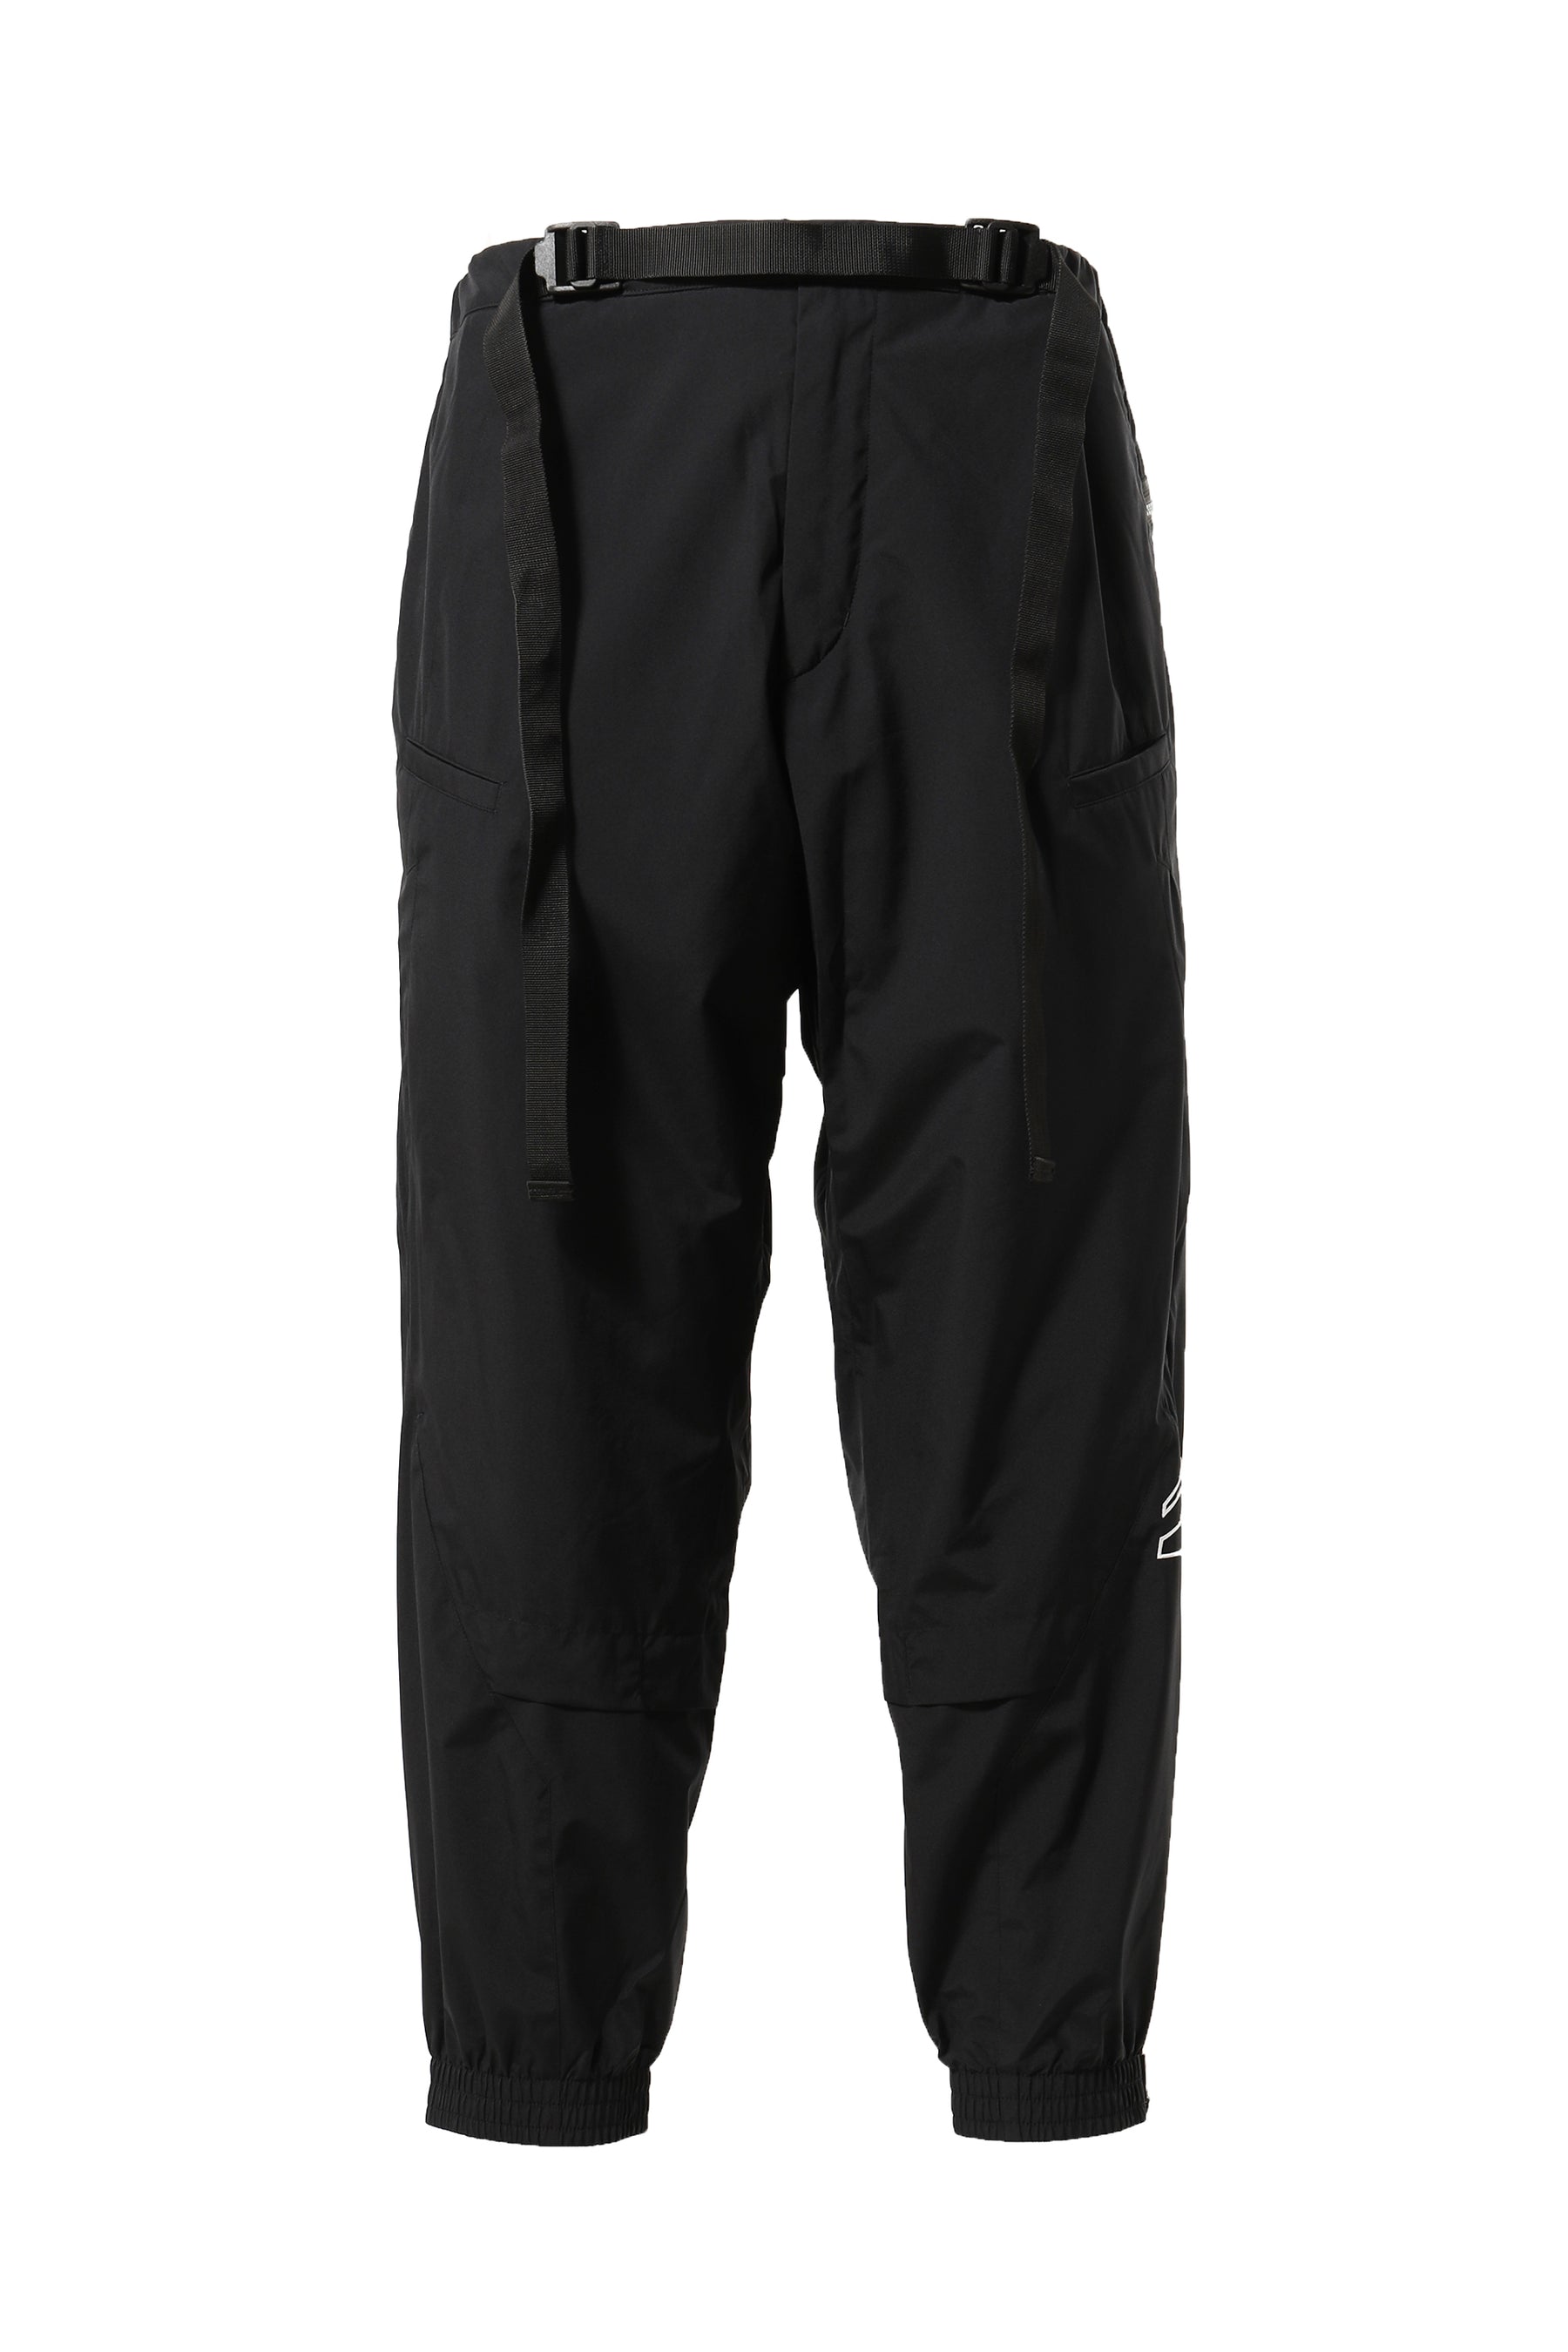 ACRONYM FW23 2L GORE-TEX WINDSTOPPER INSULATED VENT PANTS / BLK